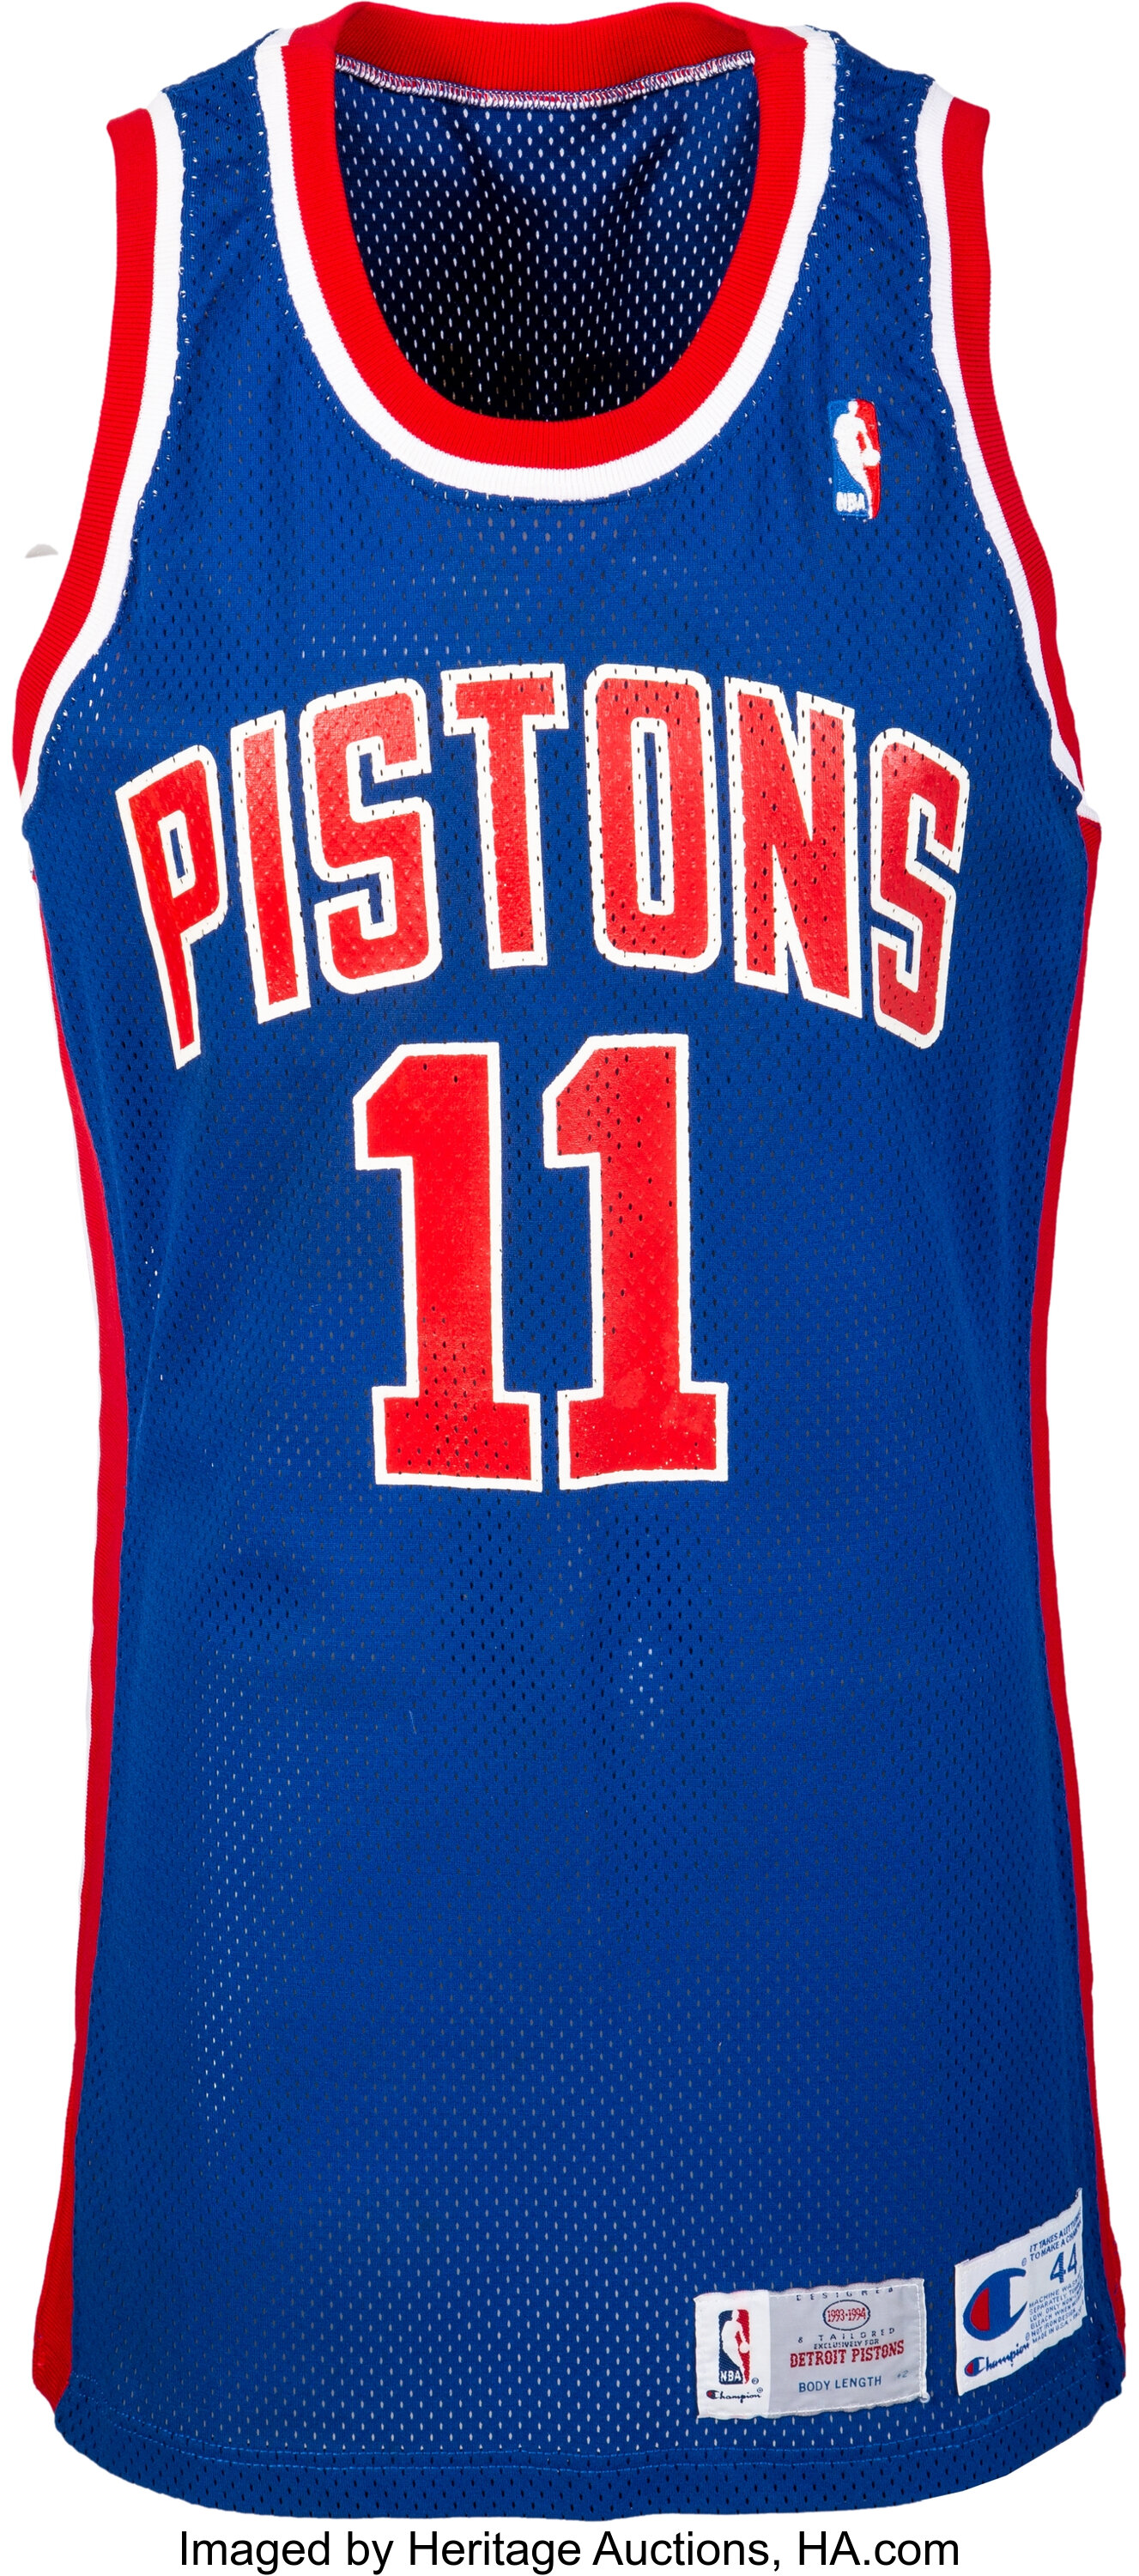 Every Uniform The Detroit Pistons Have Ever Worn